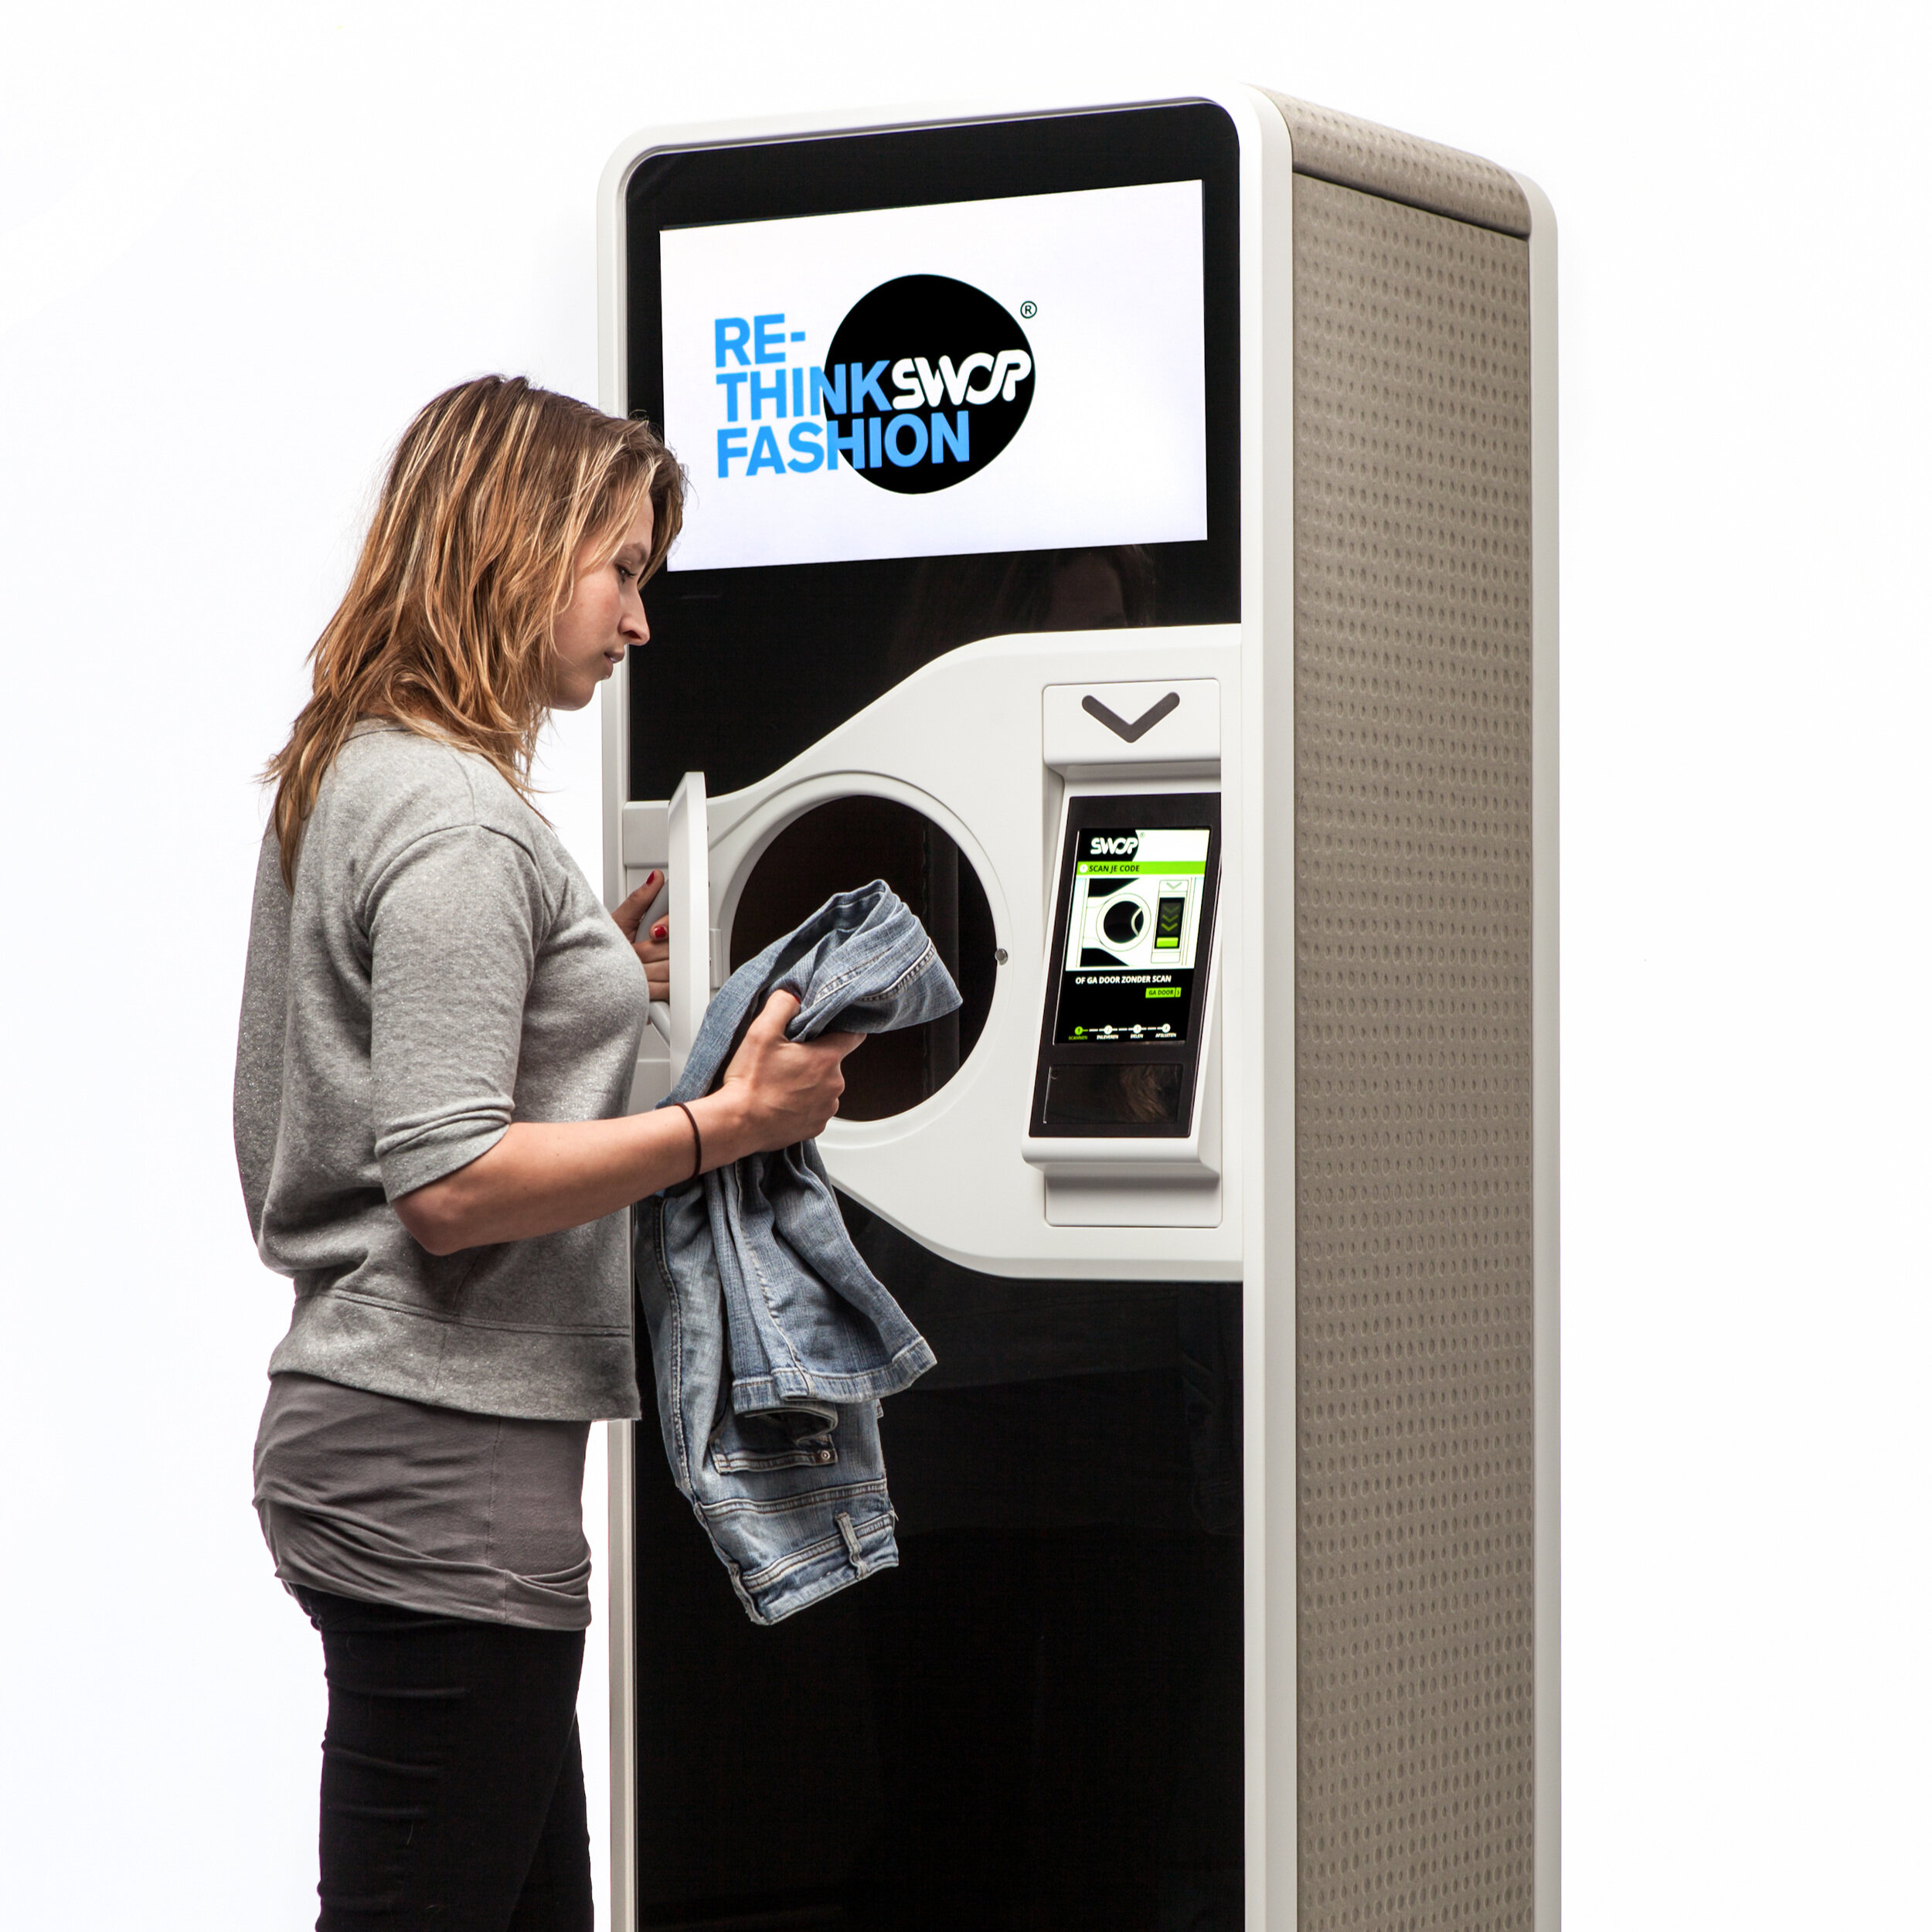 thanks to this machine, all clothing is recycled for re-use